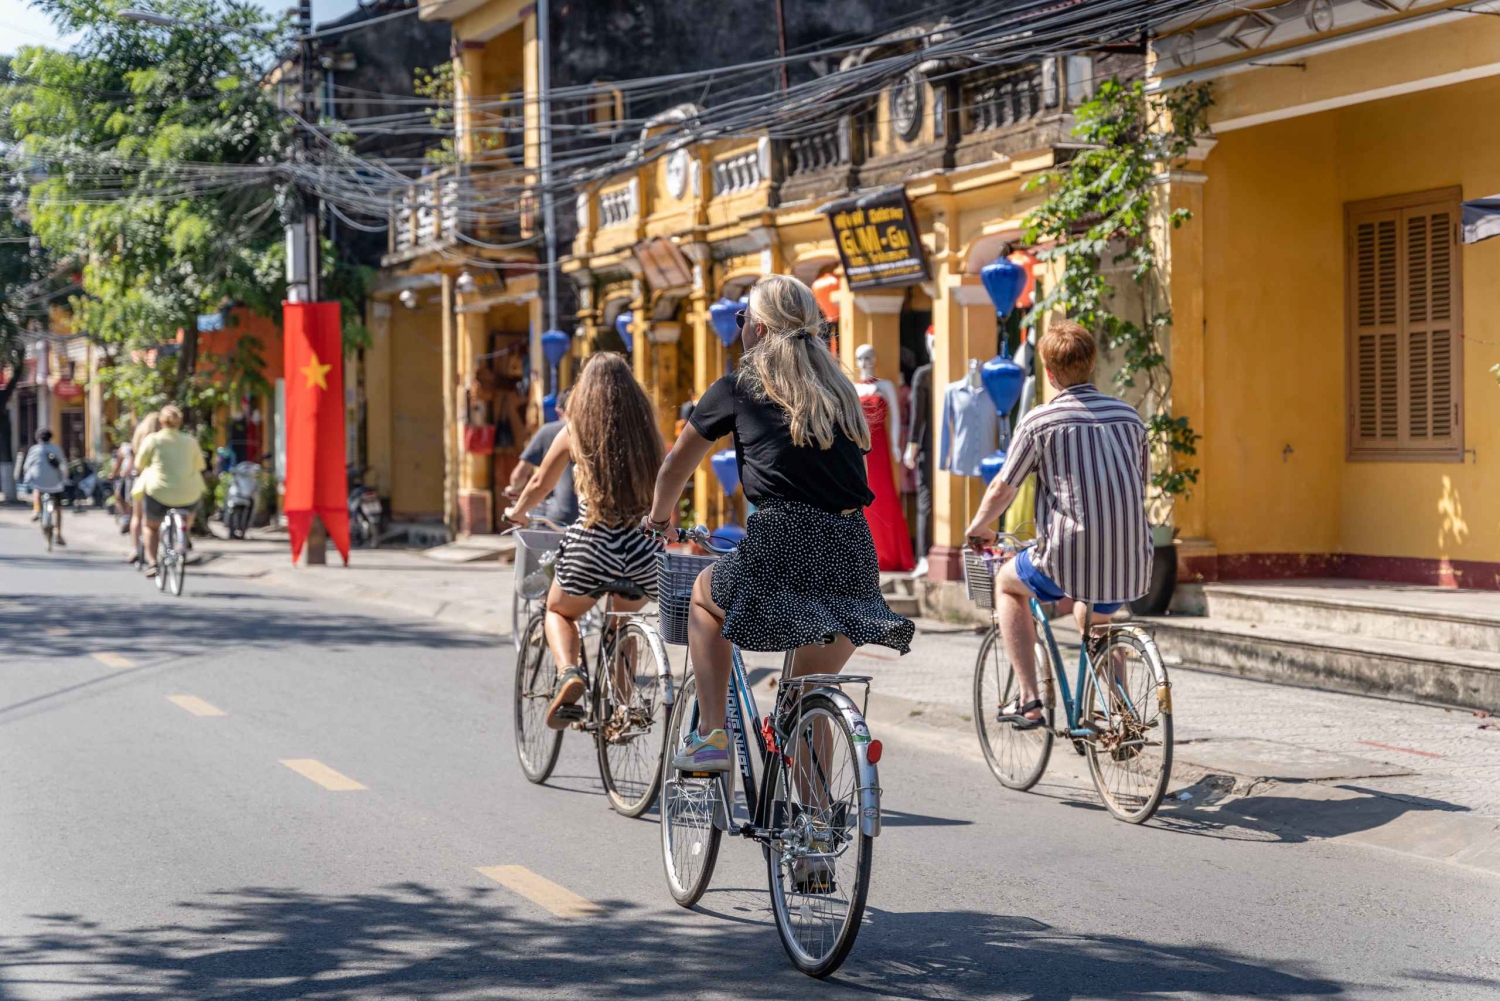 Mad Monkey Hoi An Bicycle Tour